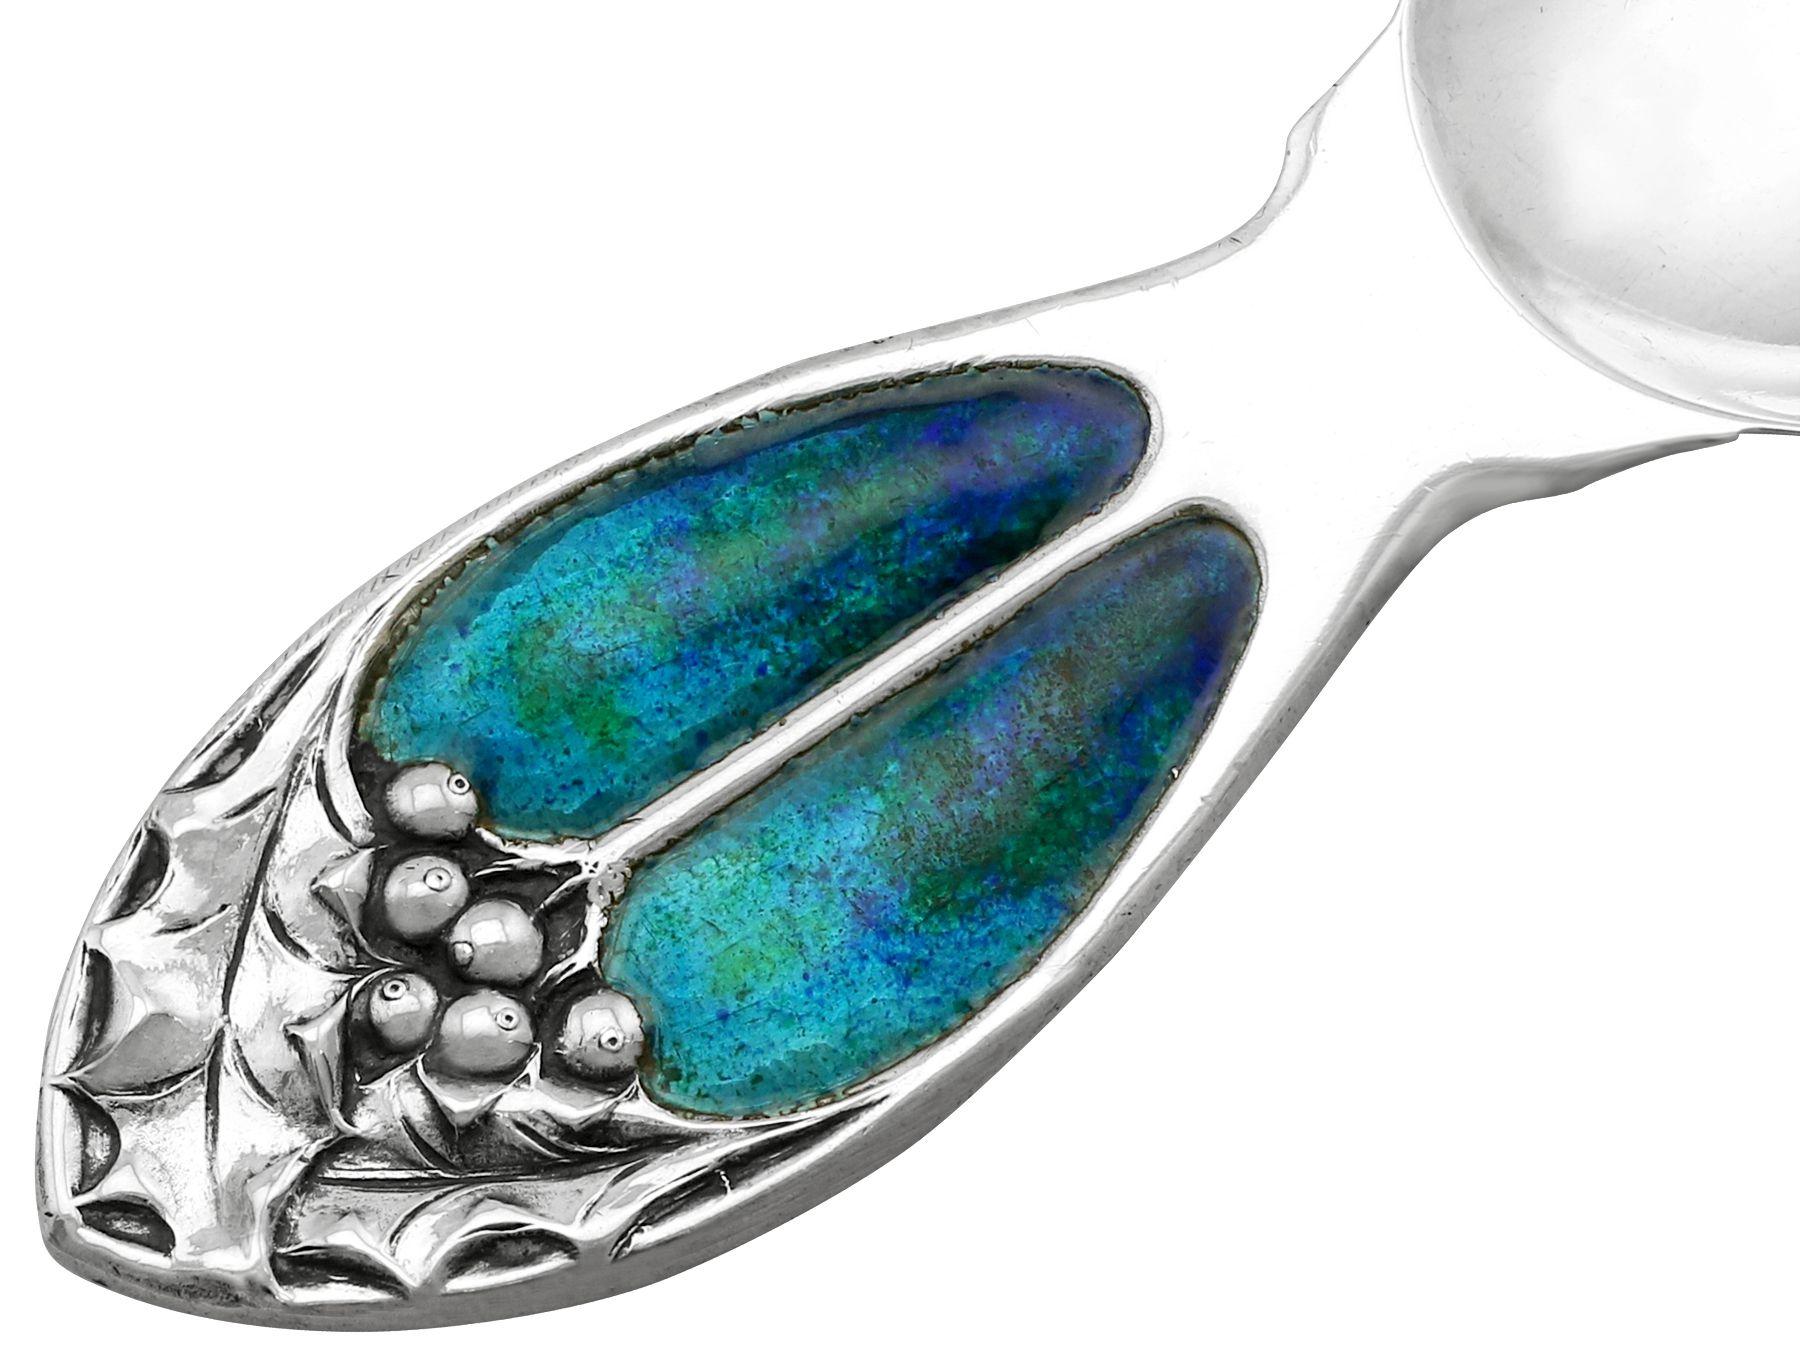 English Antique Art Nouveau Sterling Silver and Enamel Caddy Spoon For Sale